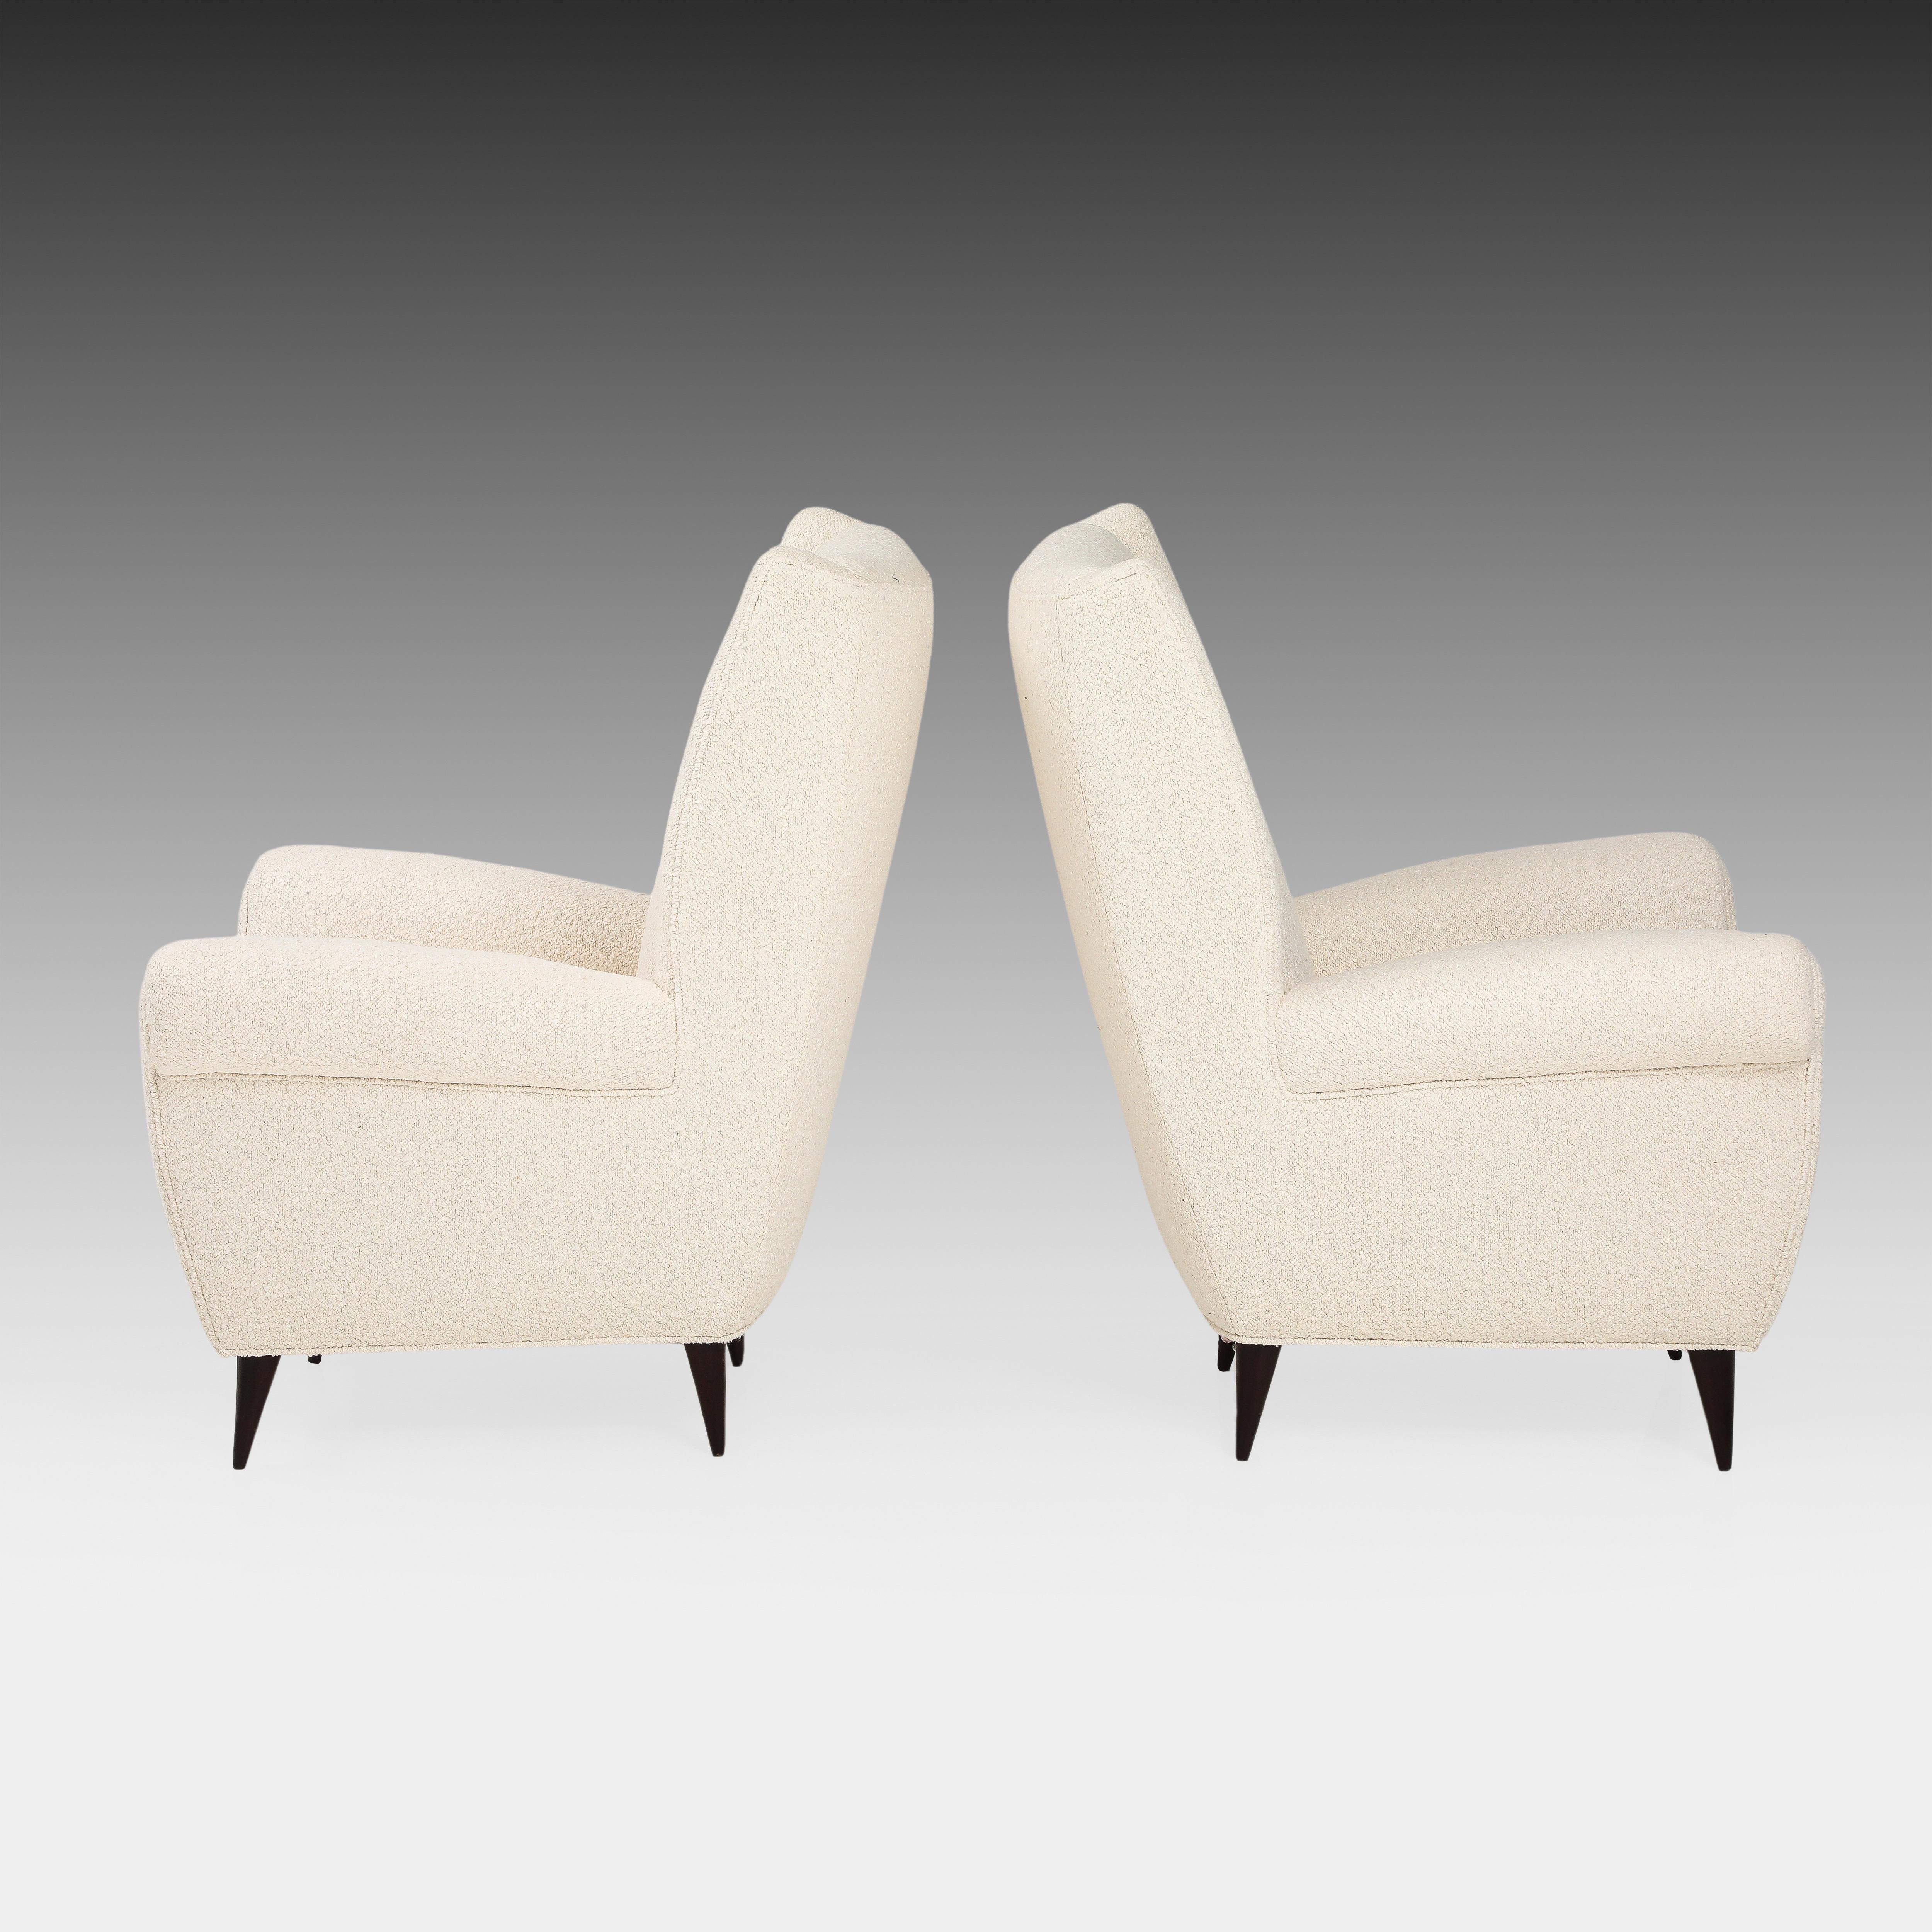 Italian Gio Ponti Pair of High Back Armchairs in Ivory Bouclé, 1950s For Sale